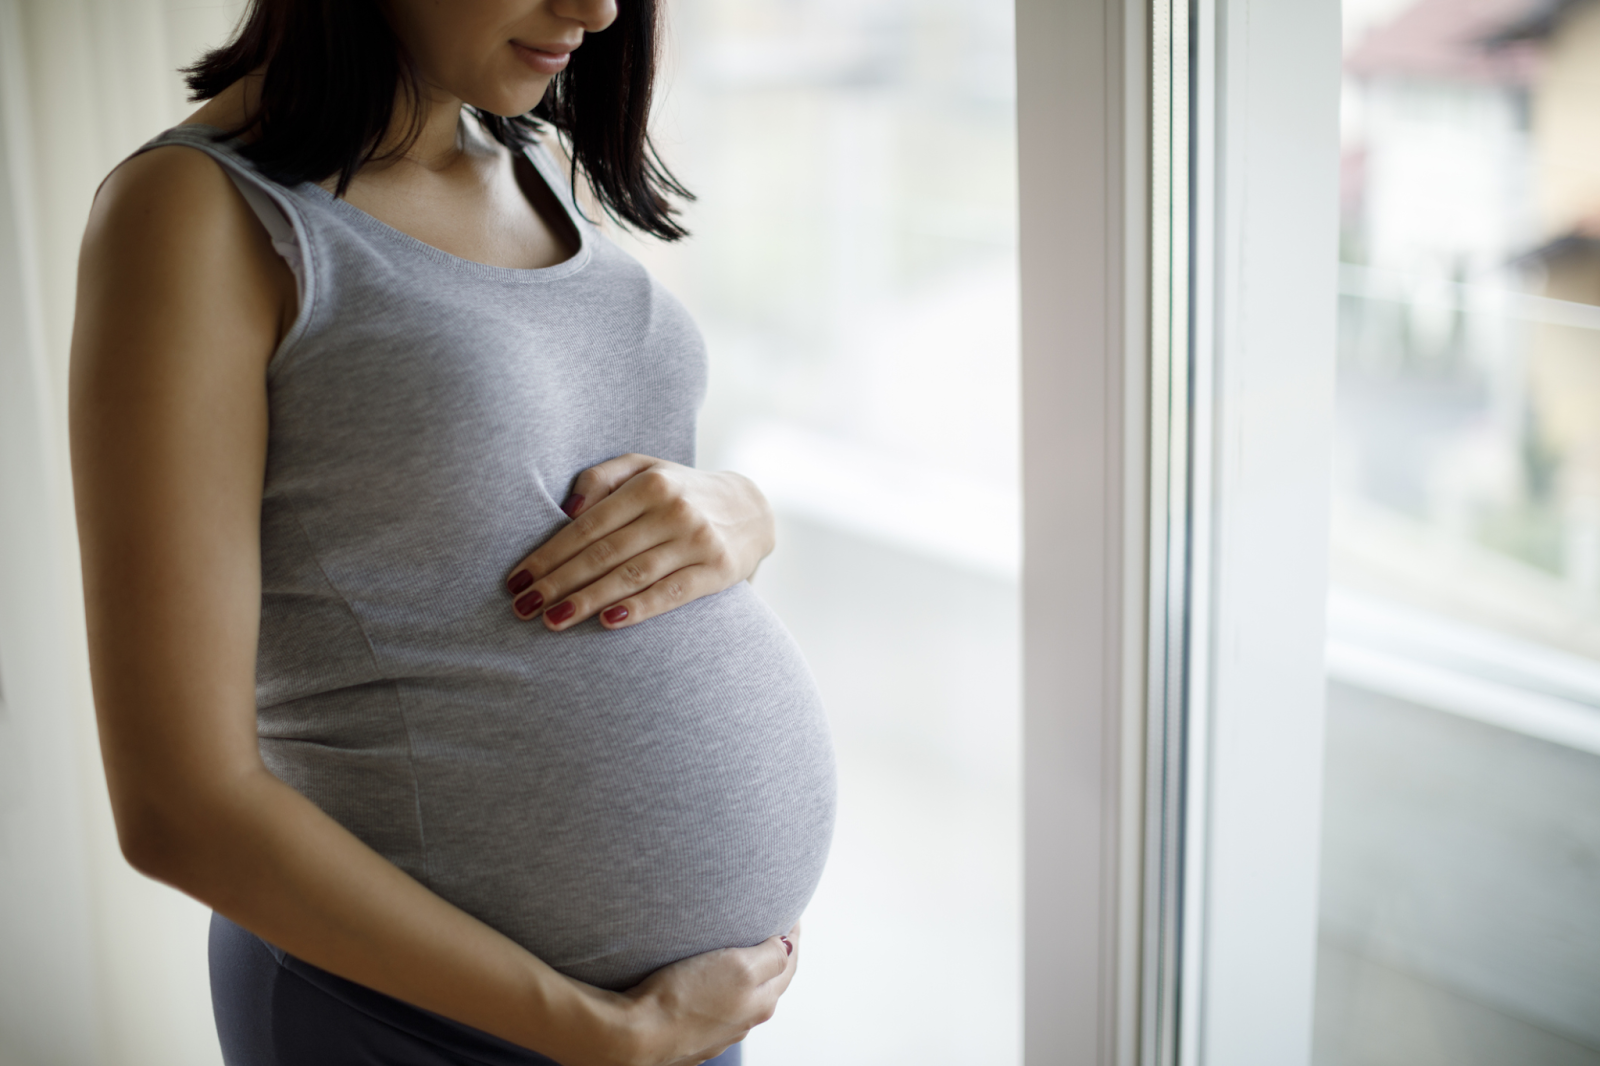 Women can receive legal abortion up to 24 weeks into pregnancy